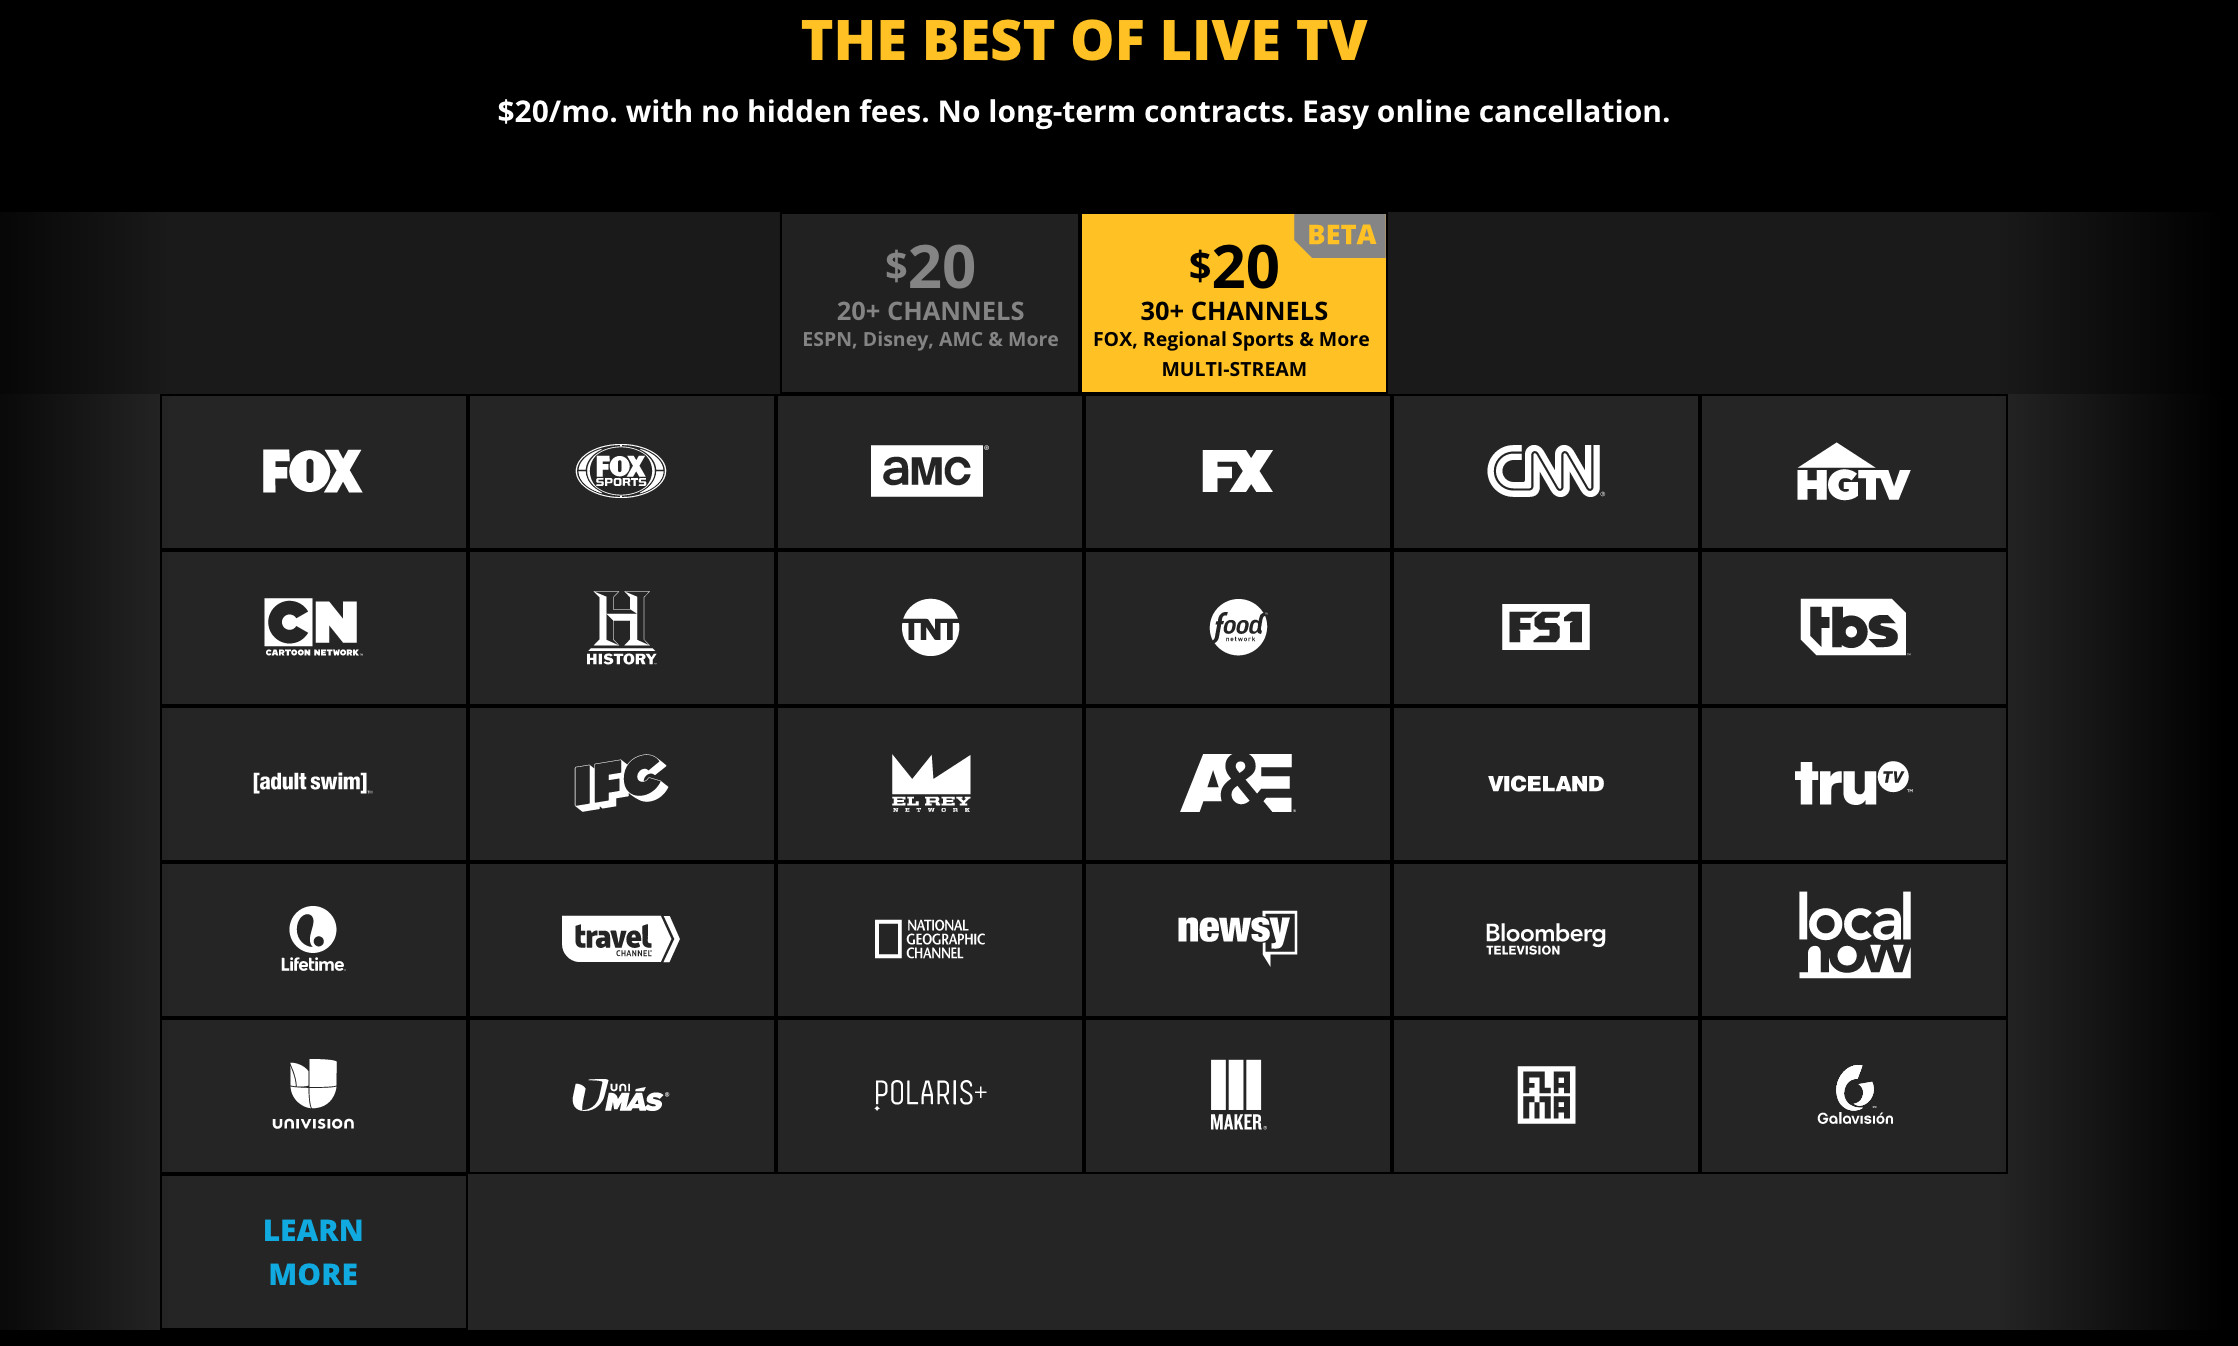 Sling TV launches new $20 package with Fox channels, but no Disney or